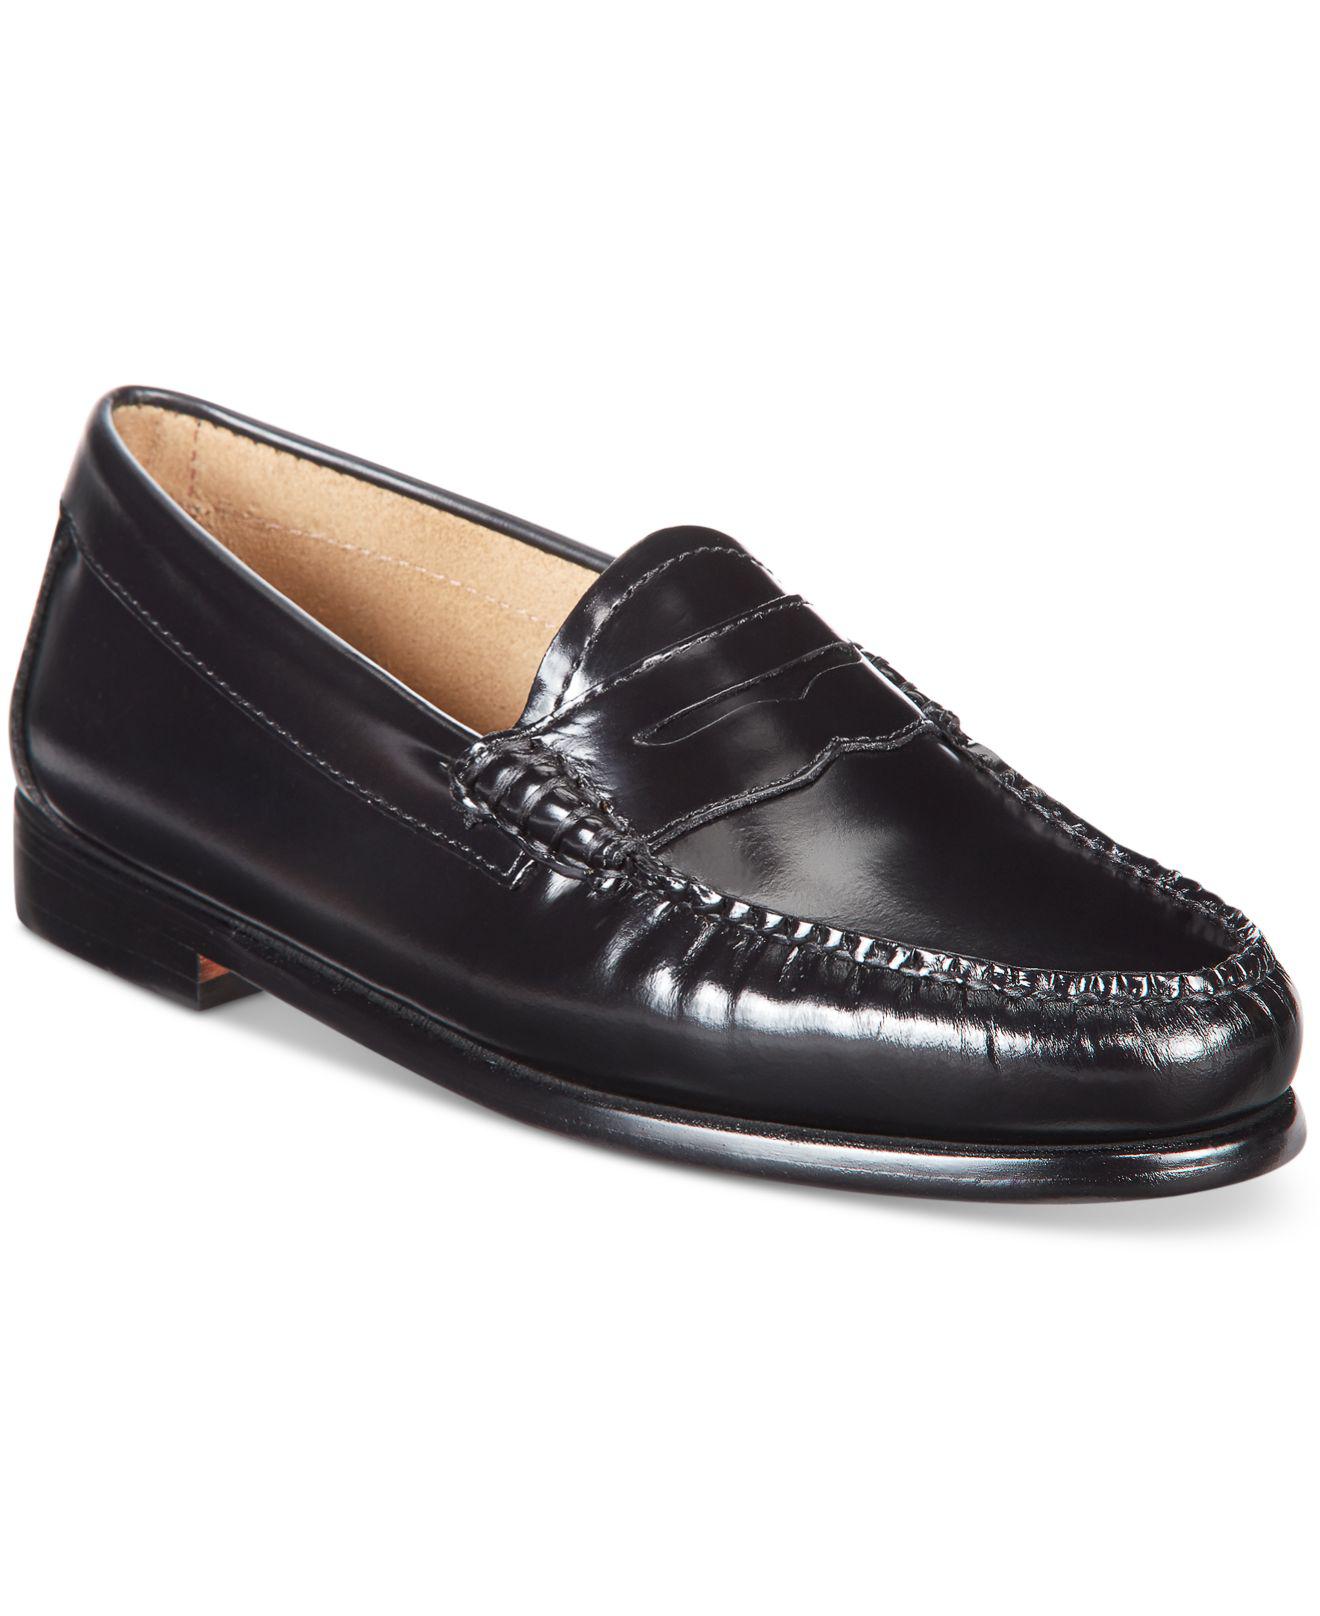 G.H.BASS Leather Women's Weejuns Whitney Penny Loafers in Black - Lyst